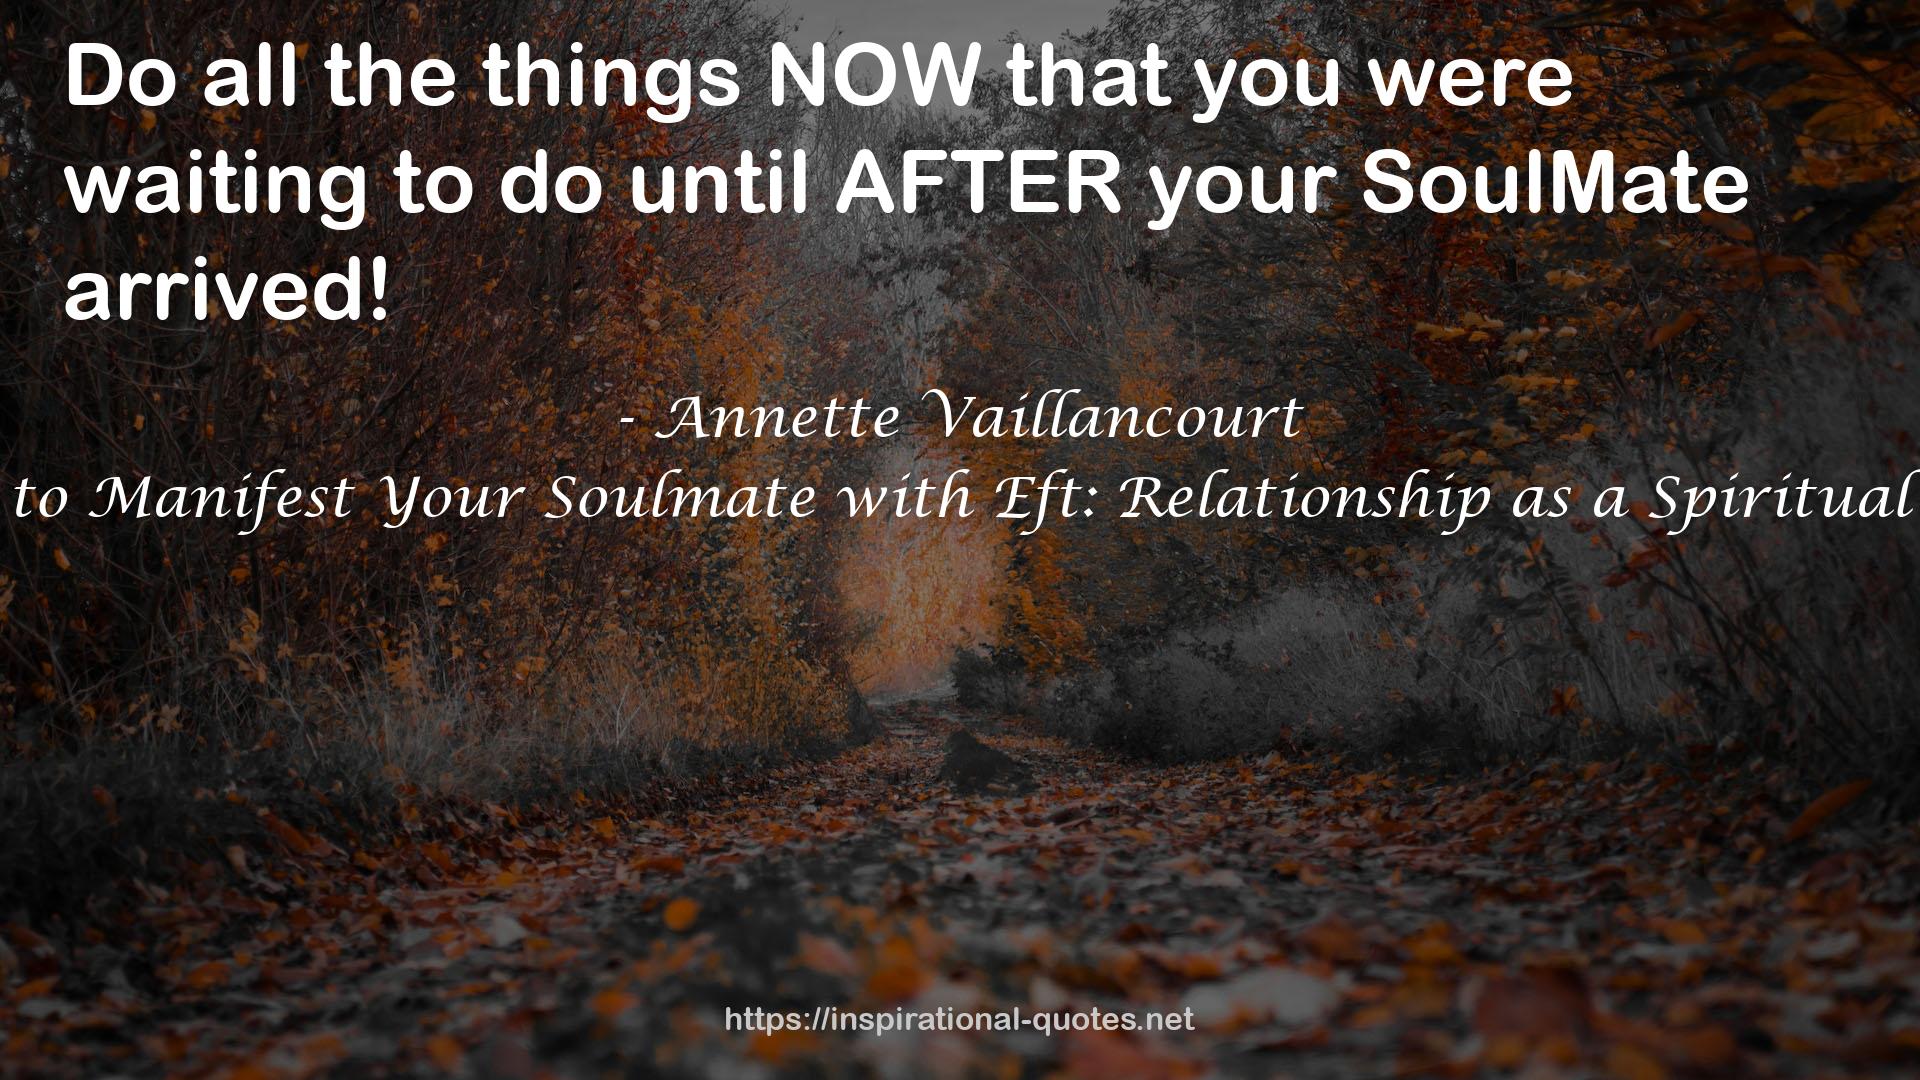 How to Manifest Your Soulmate with Eft: Relationship as a Spiritual Path QUOTES